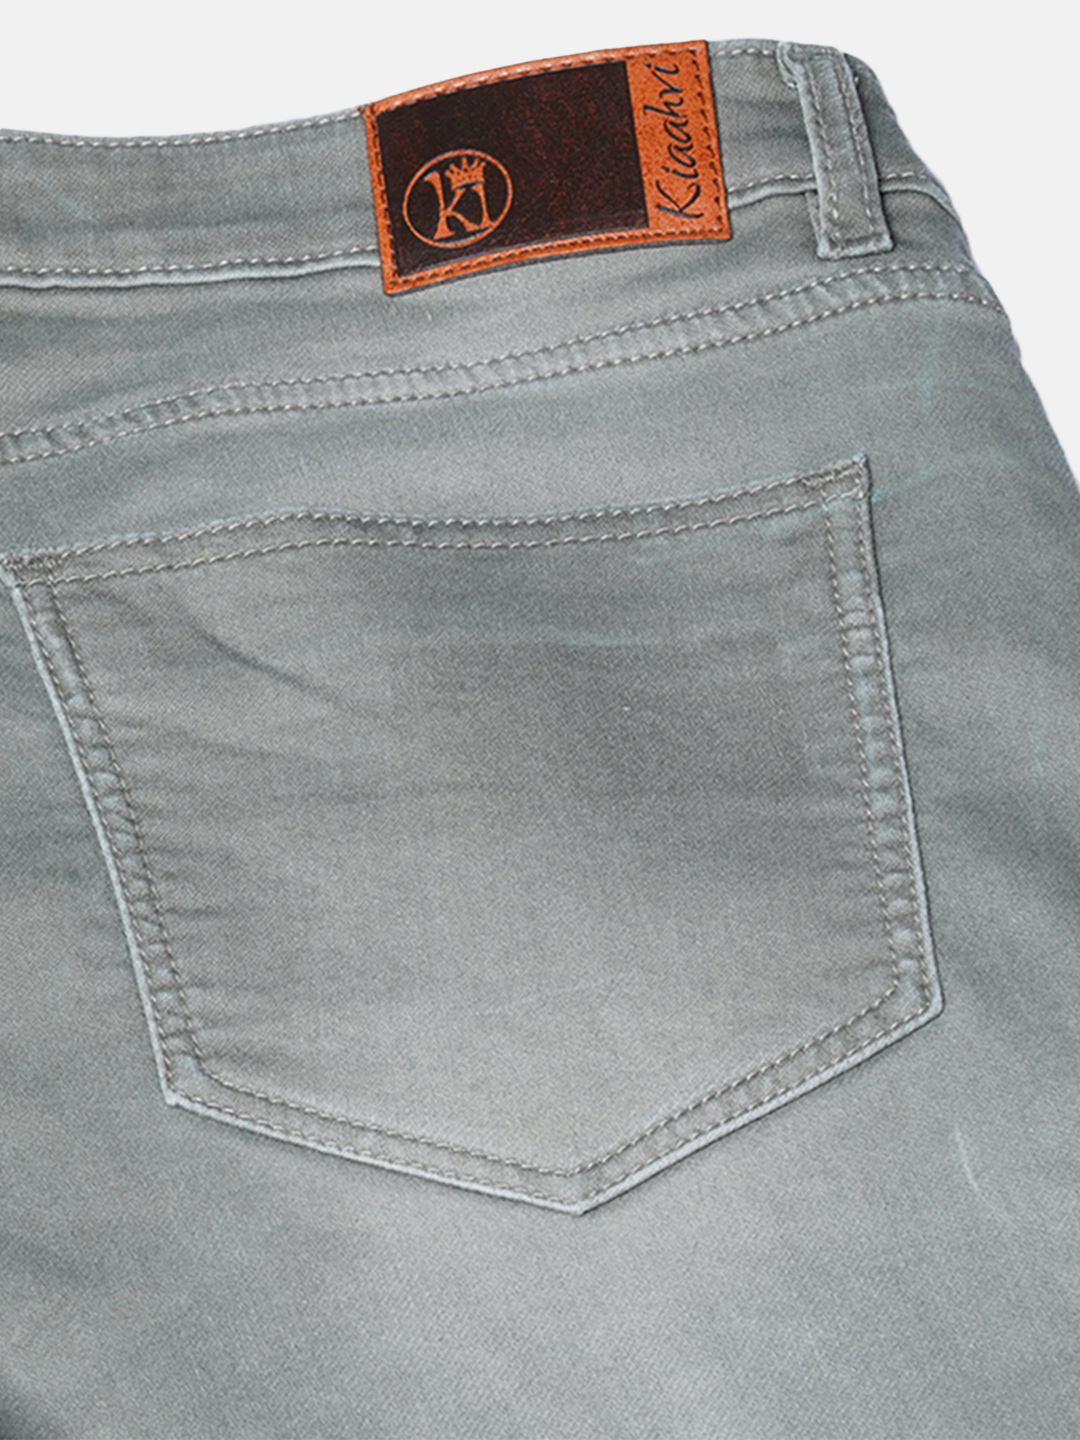 Authentic smoky Jeans